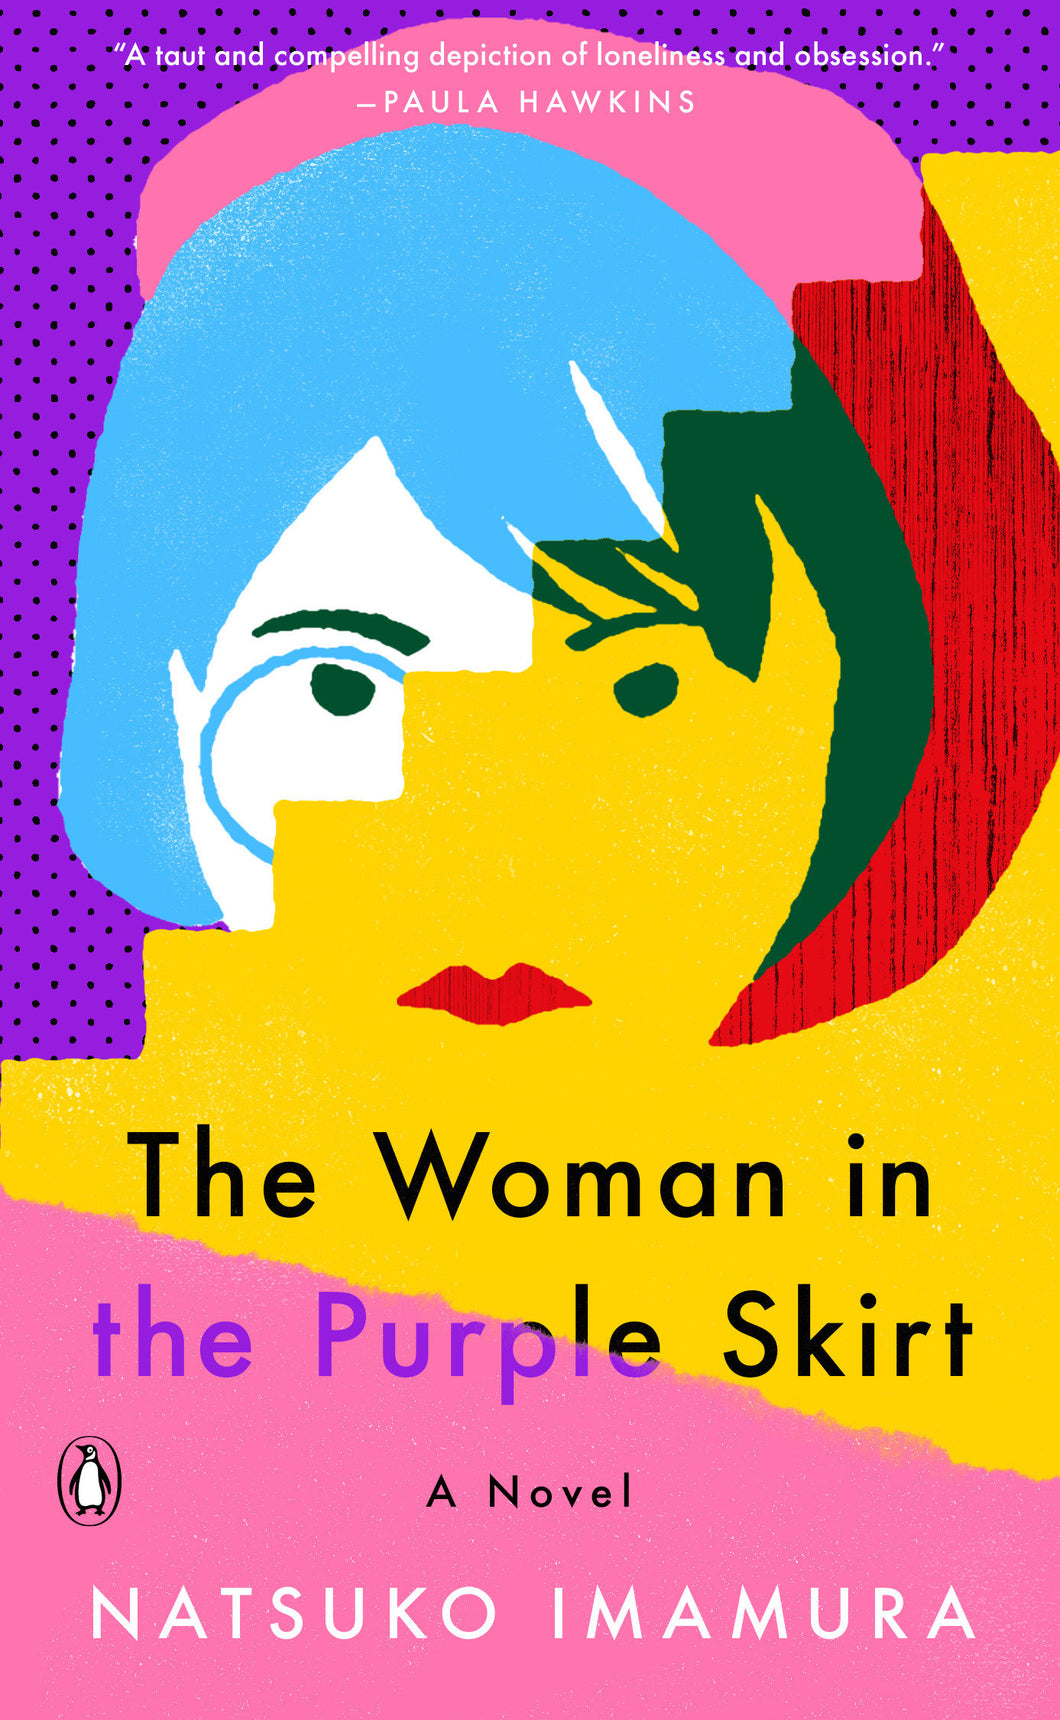 The Woman in the Purple Skirt: A Novel